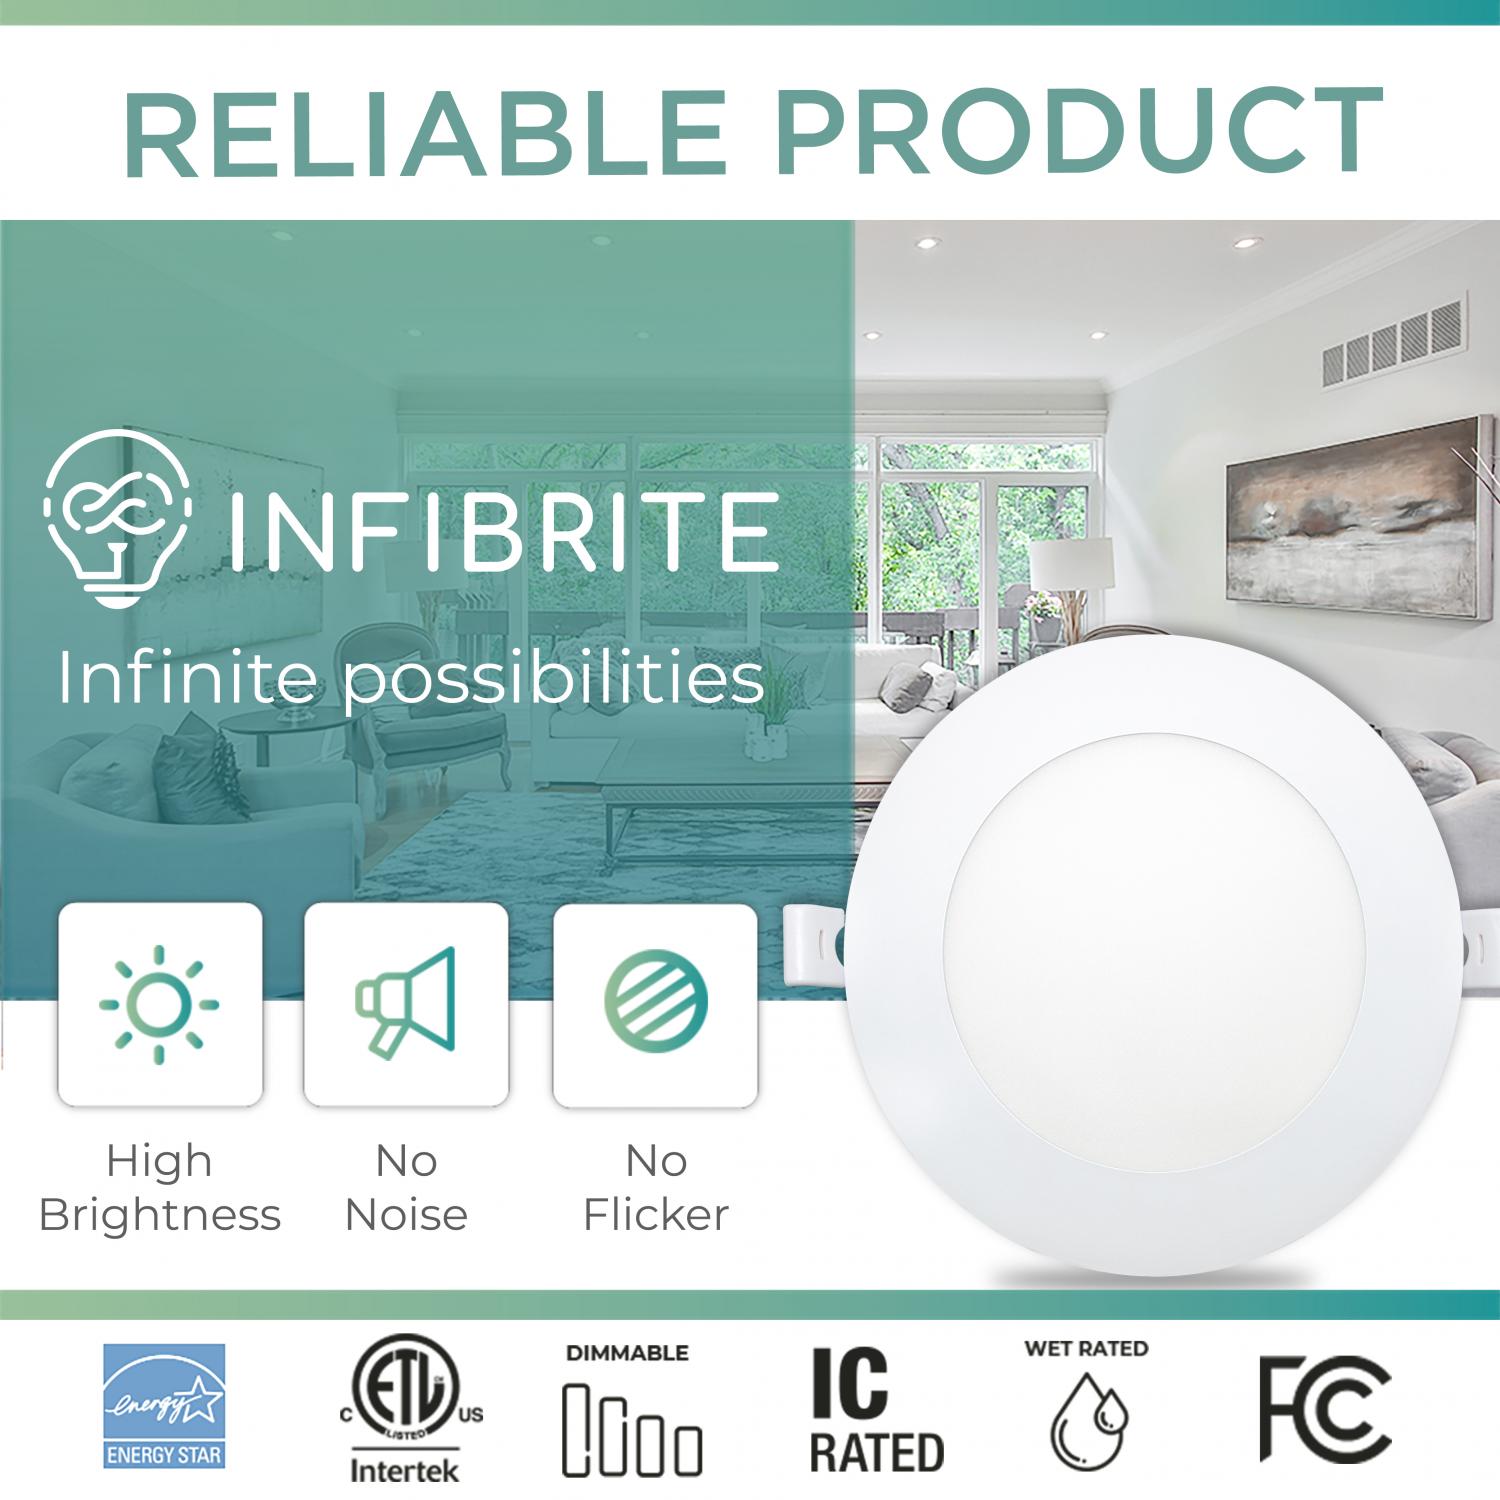 Infibrite 4 Inch 3000K Warm White 9W 750 LM Ultra-Slim LED Ceiling Light with Junction Box, Flush Mount, Dimmable, Fixture for Bedroom, Wet Rated for Bathroom, Easy Install, 75W Eqv, ETL & Energy Star, US Company (12 Pack)